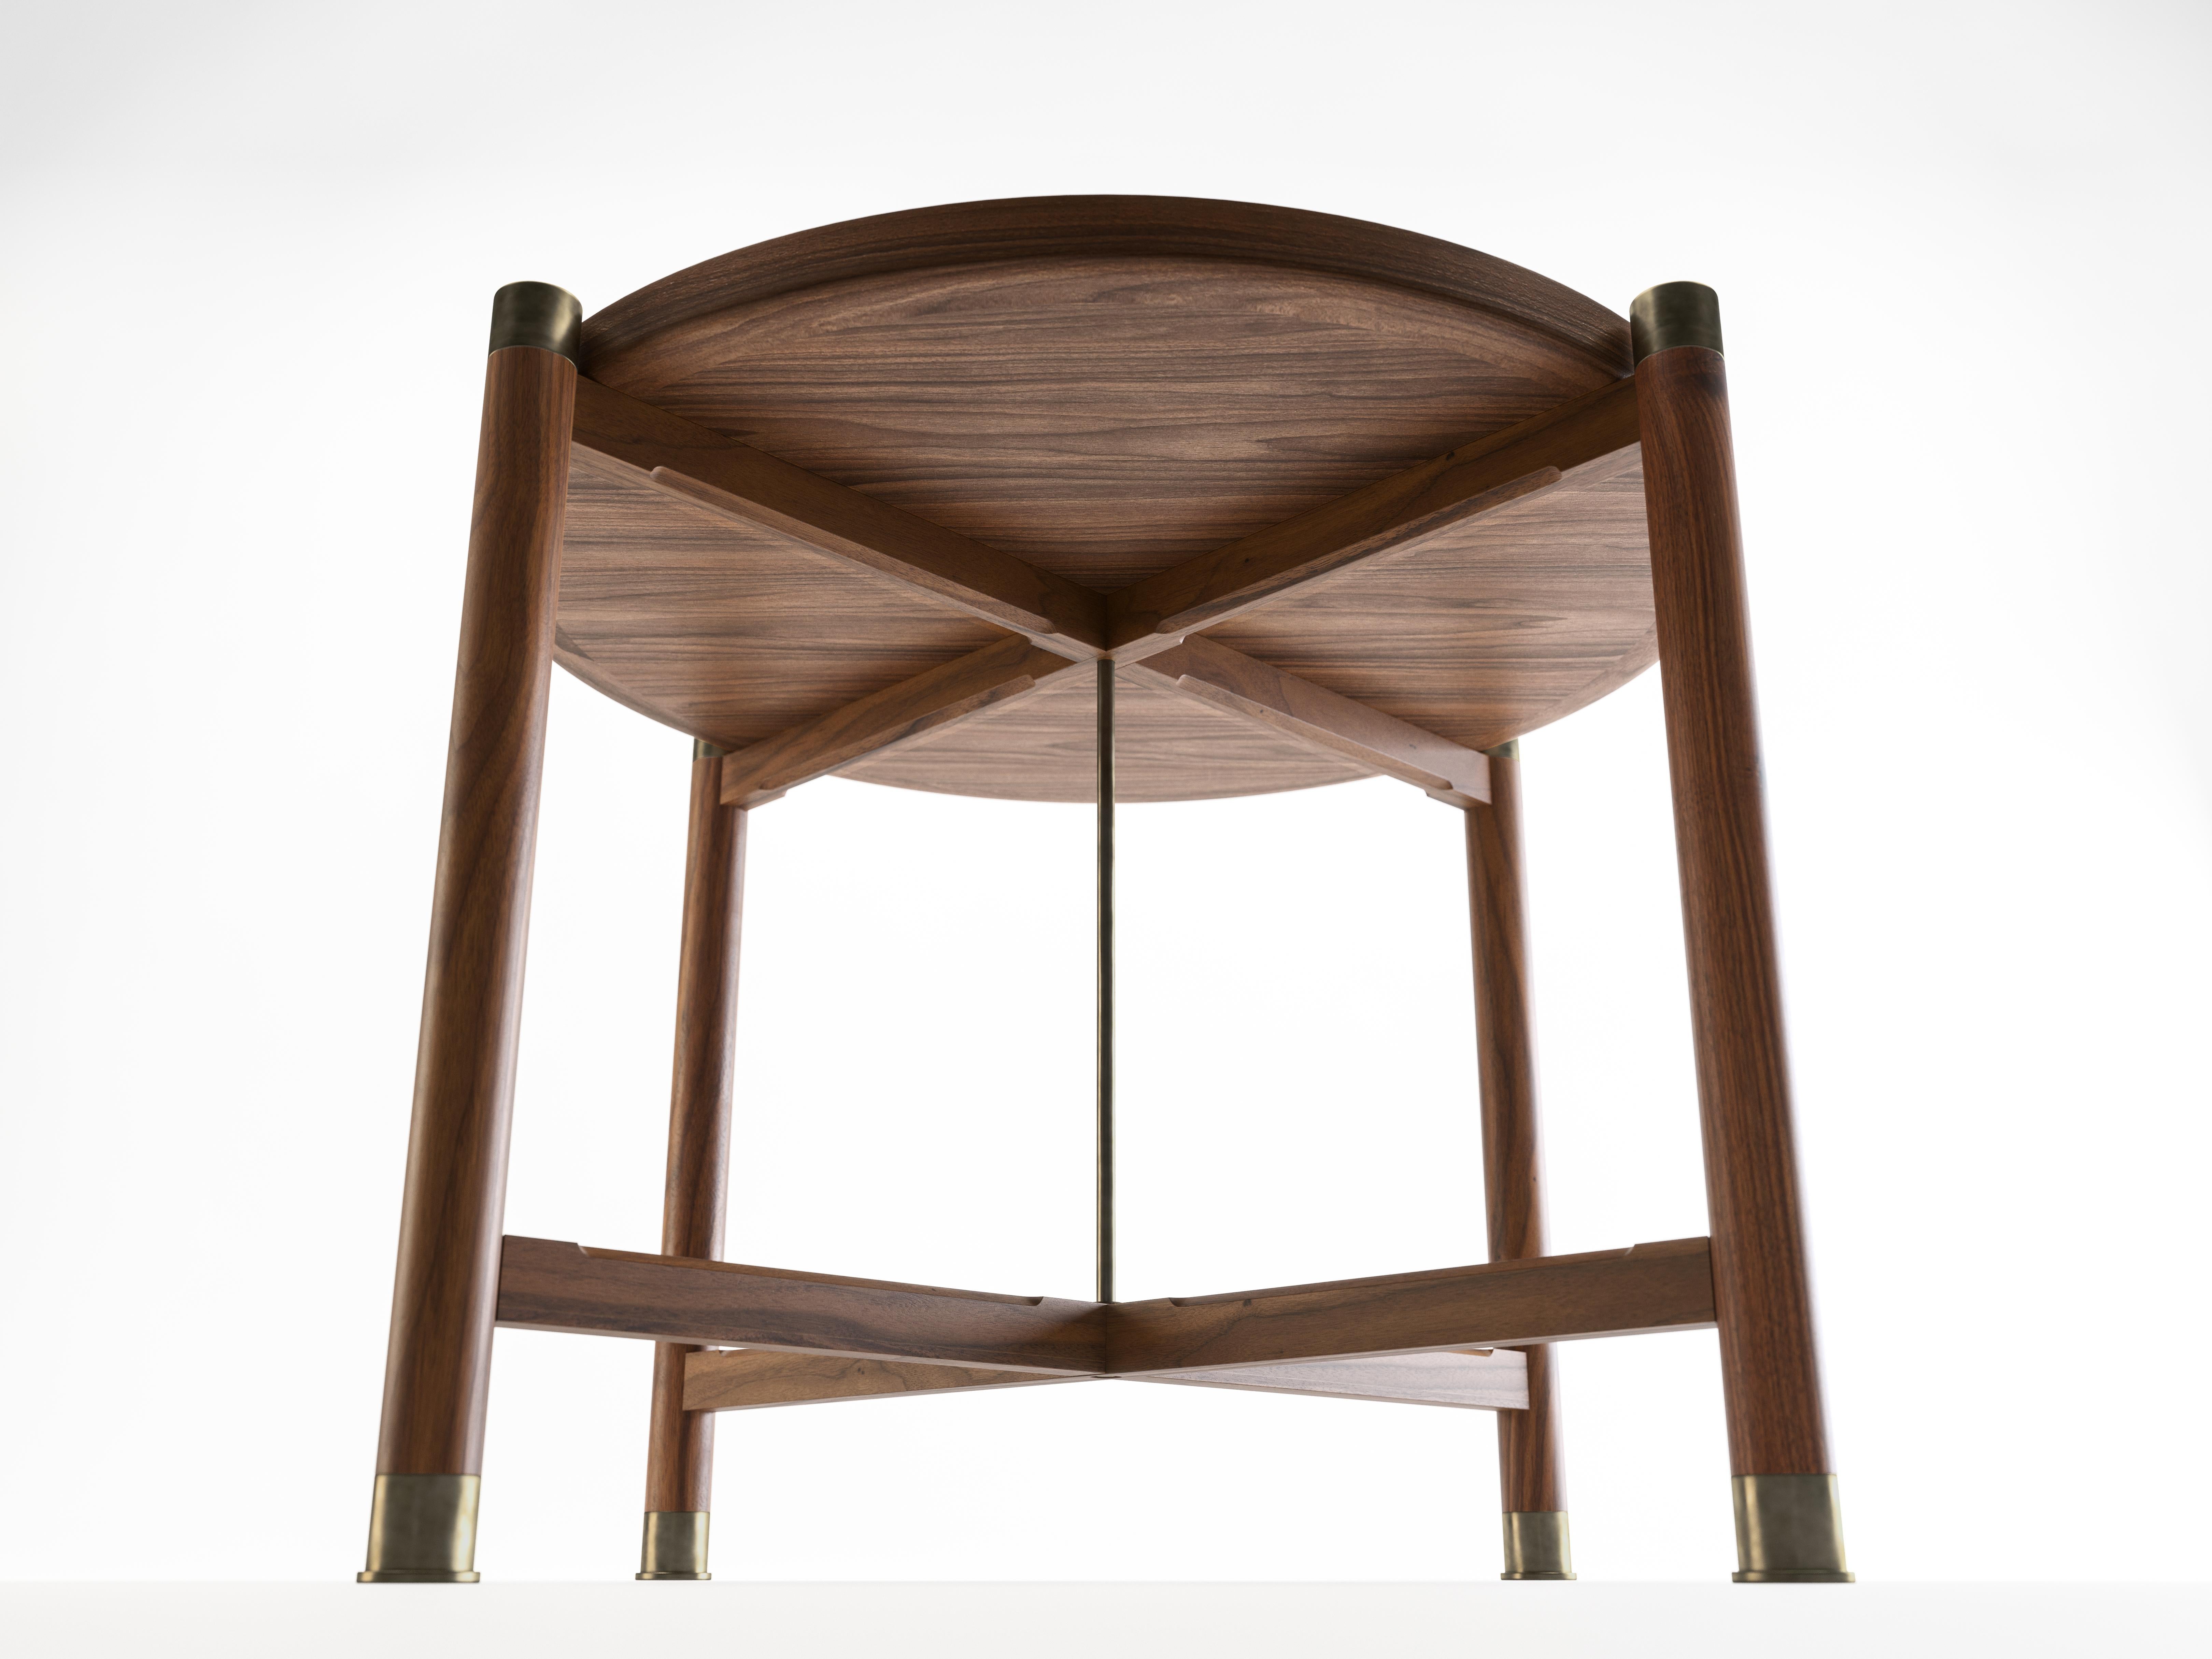 Otto Round Side Table in Light Walnut with Antique Brass Fittings and Stem In New Condition For Sale In Los Angeles, CA